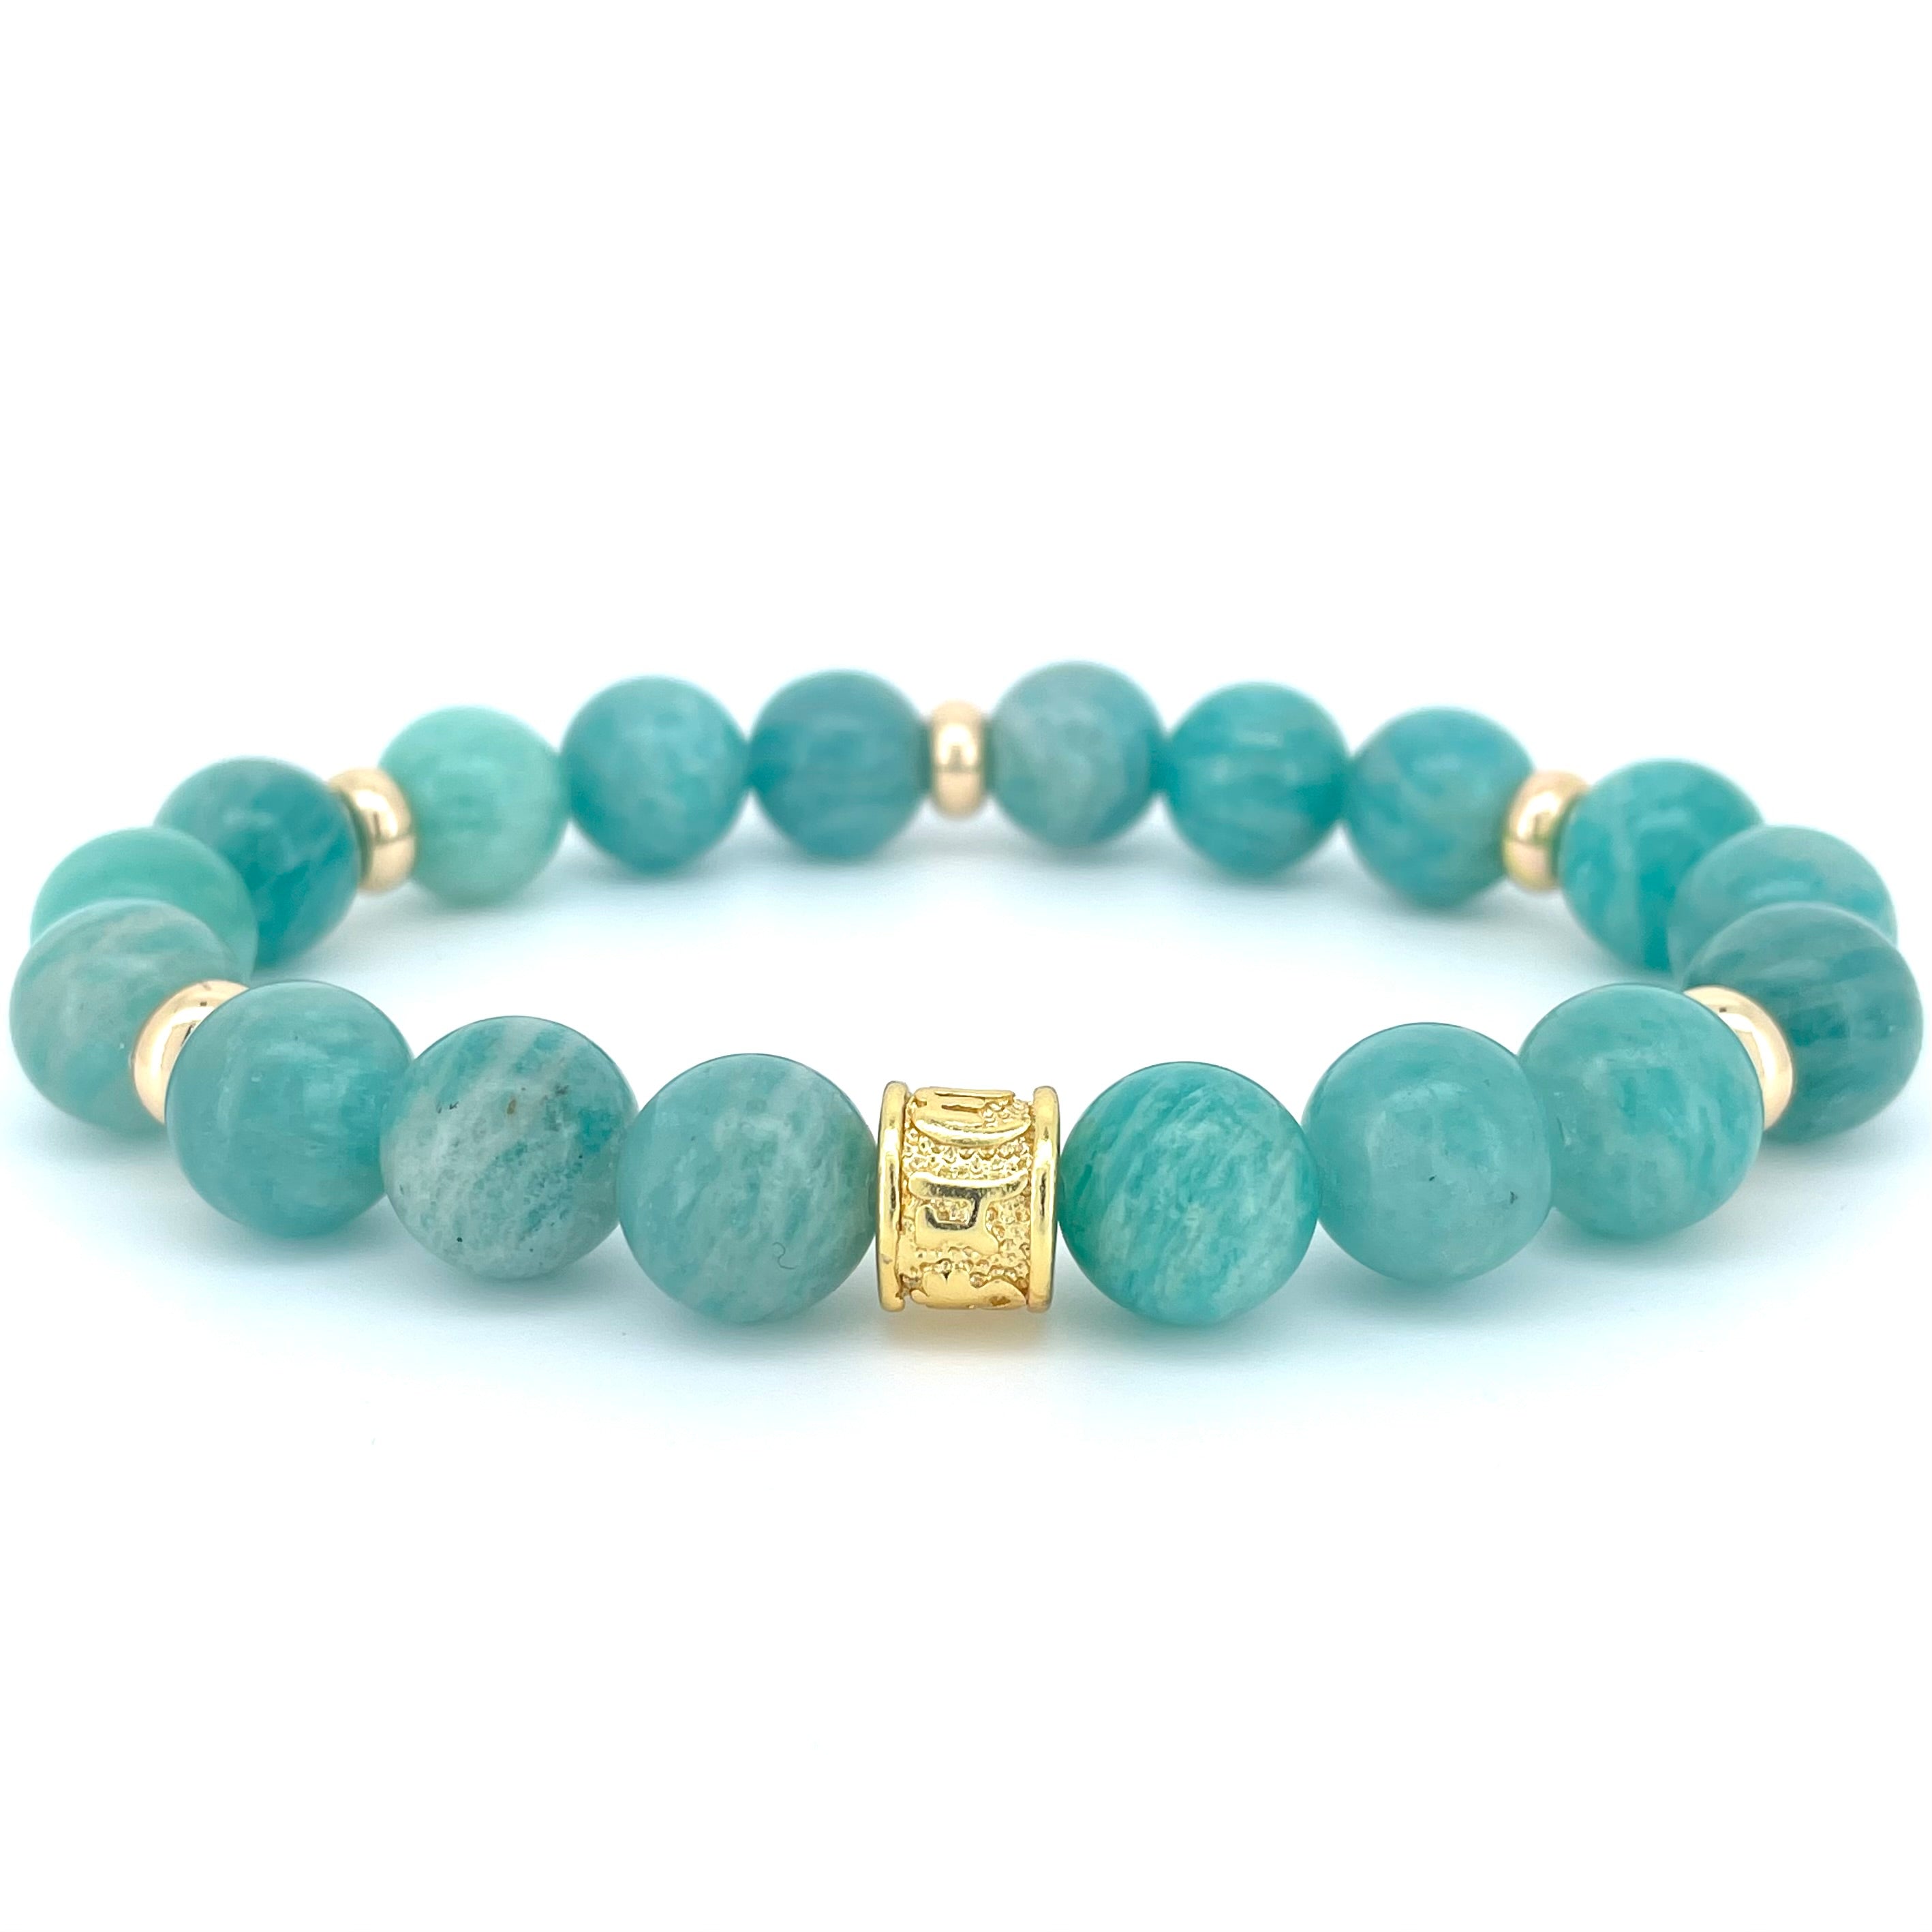 HIGH GRADE AMAZONITE & GOLD BEADED BRACELET - HALCYON COLLECTION - Headless Nation